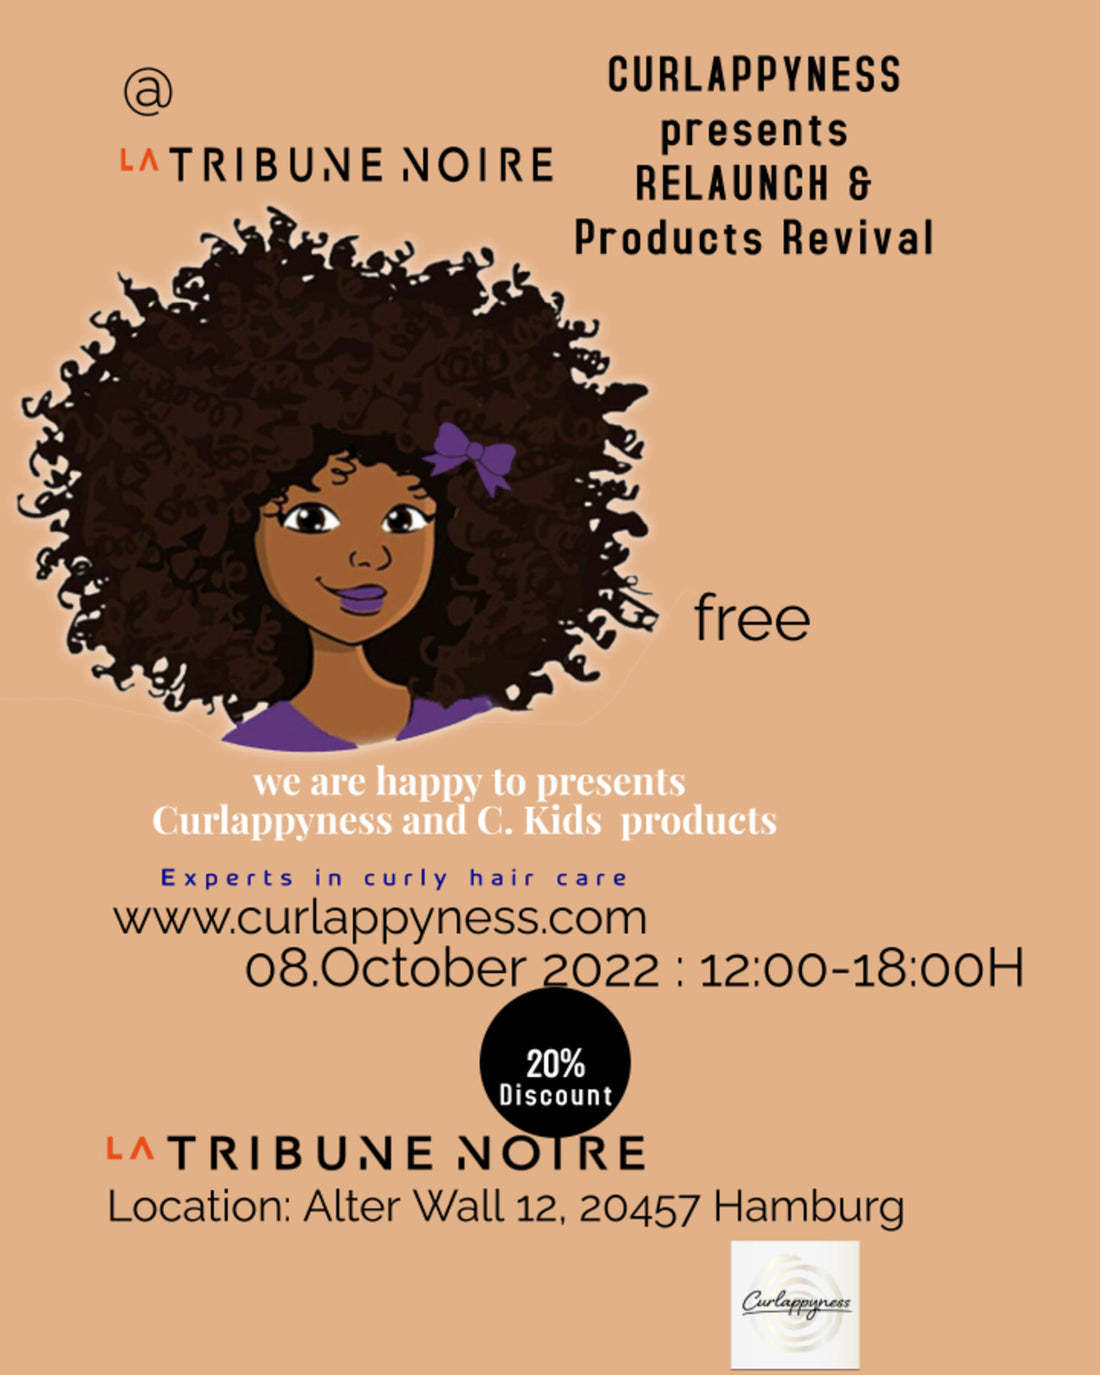 Relaunch Curlappyness Curly Hair Products am 08.10.2022 von 12:00- 18:00 Uhr